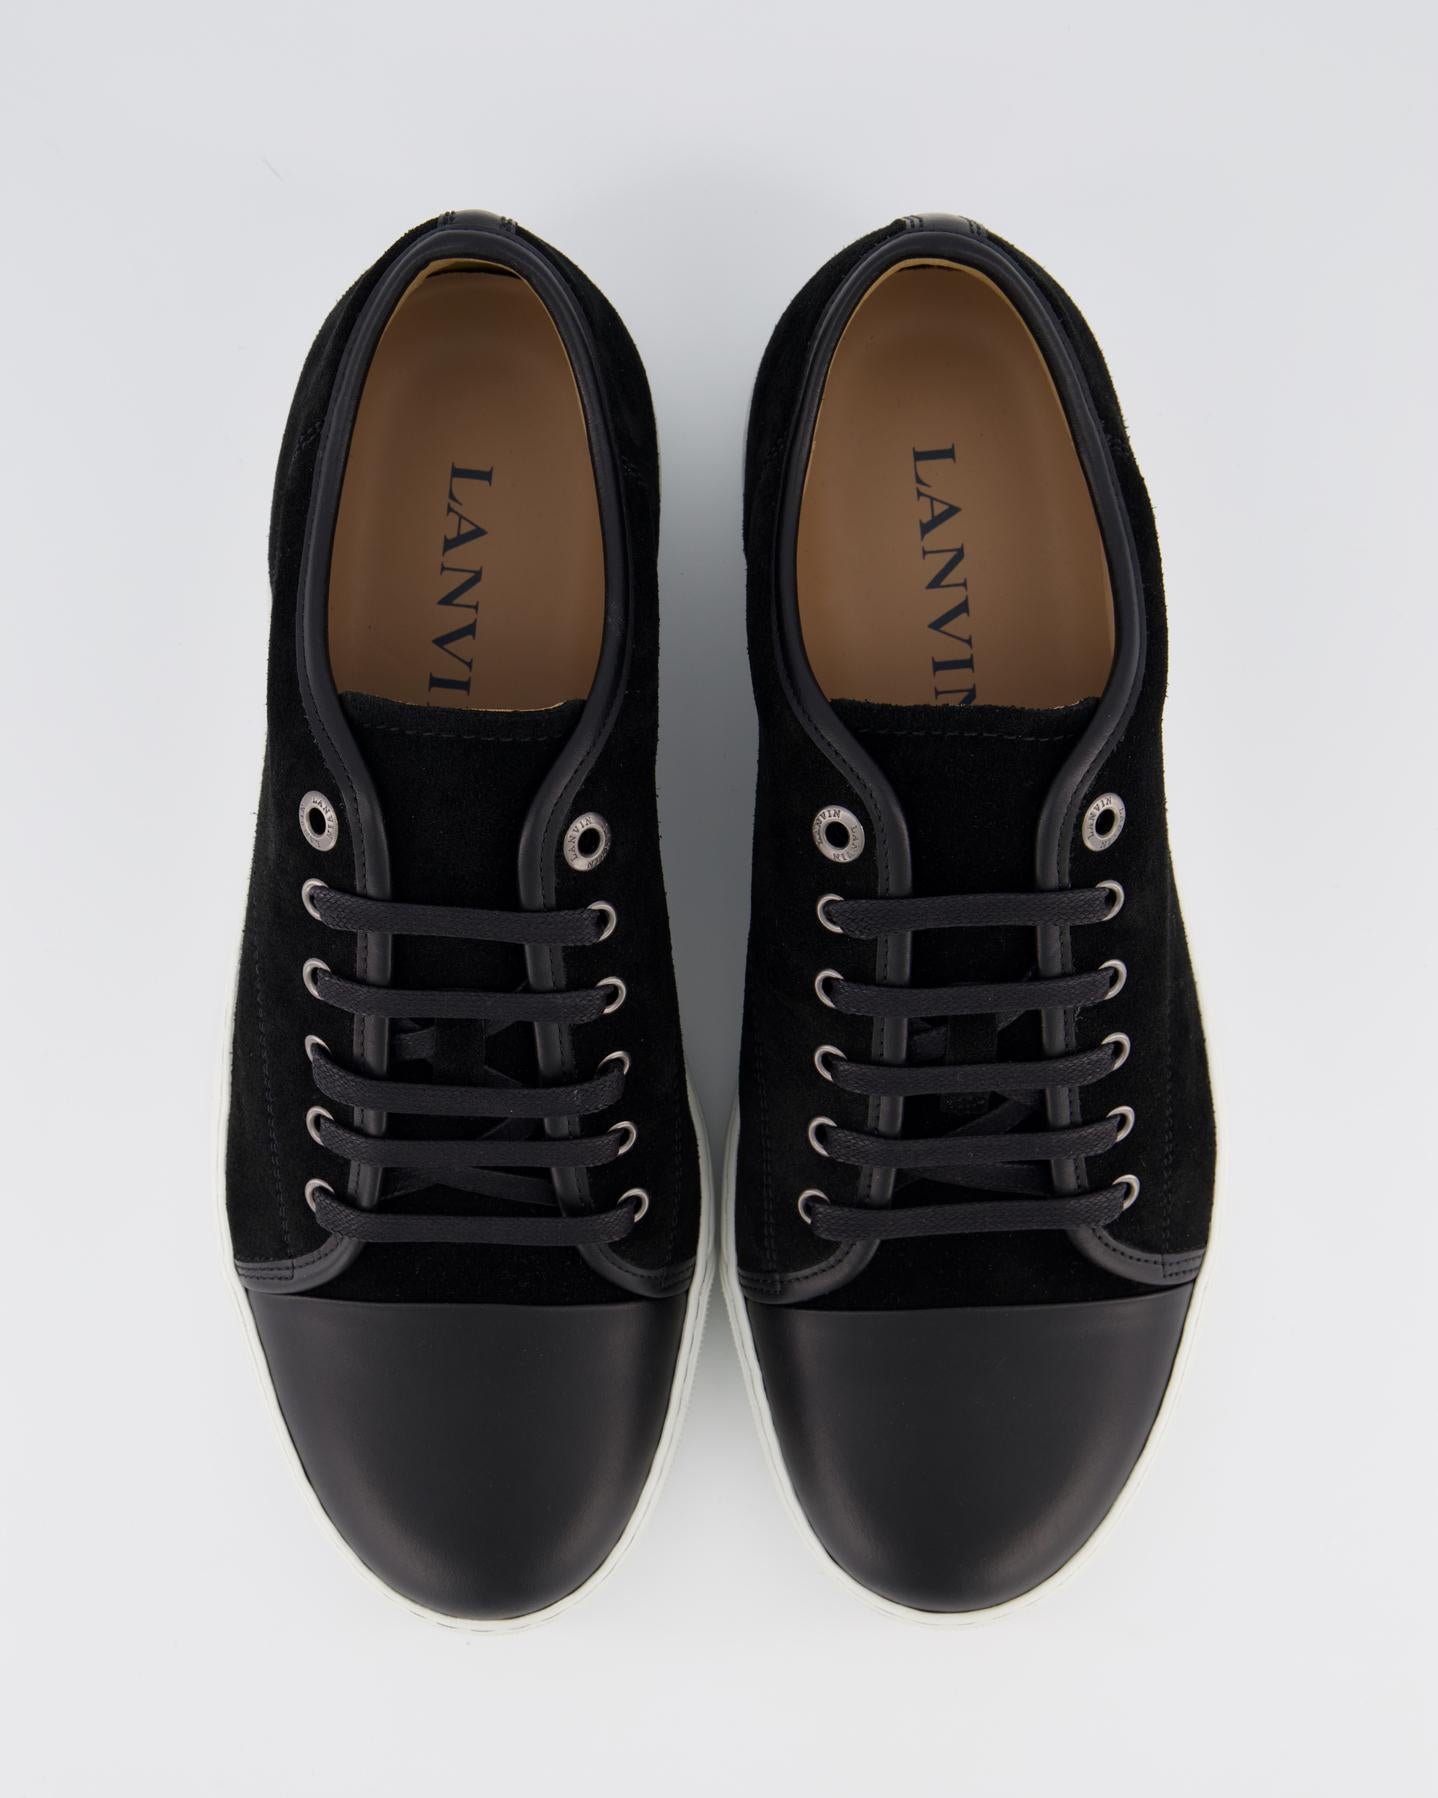 Men Suede and nappa captoe low to